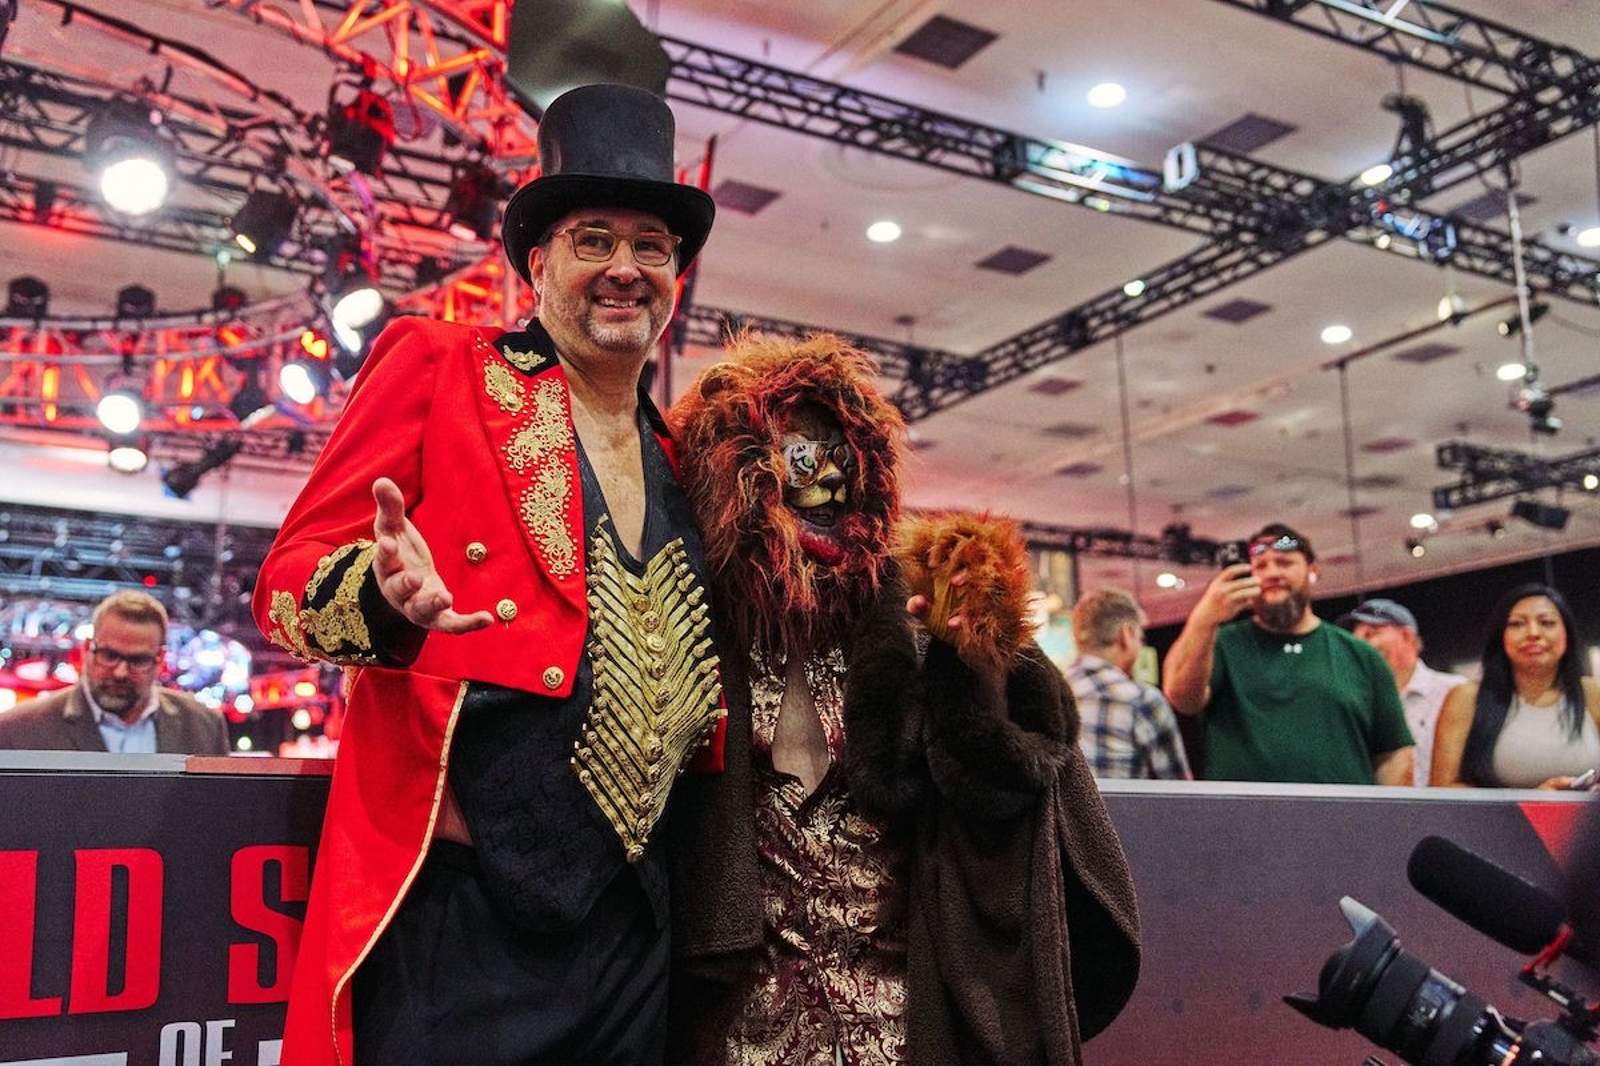 WSOP 2023 Day 38 Recap: Main Event Breaks Attendance Record, Phil Hellmuth the Greatest Showman On and Off the Felt